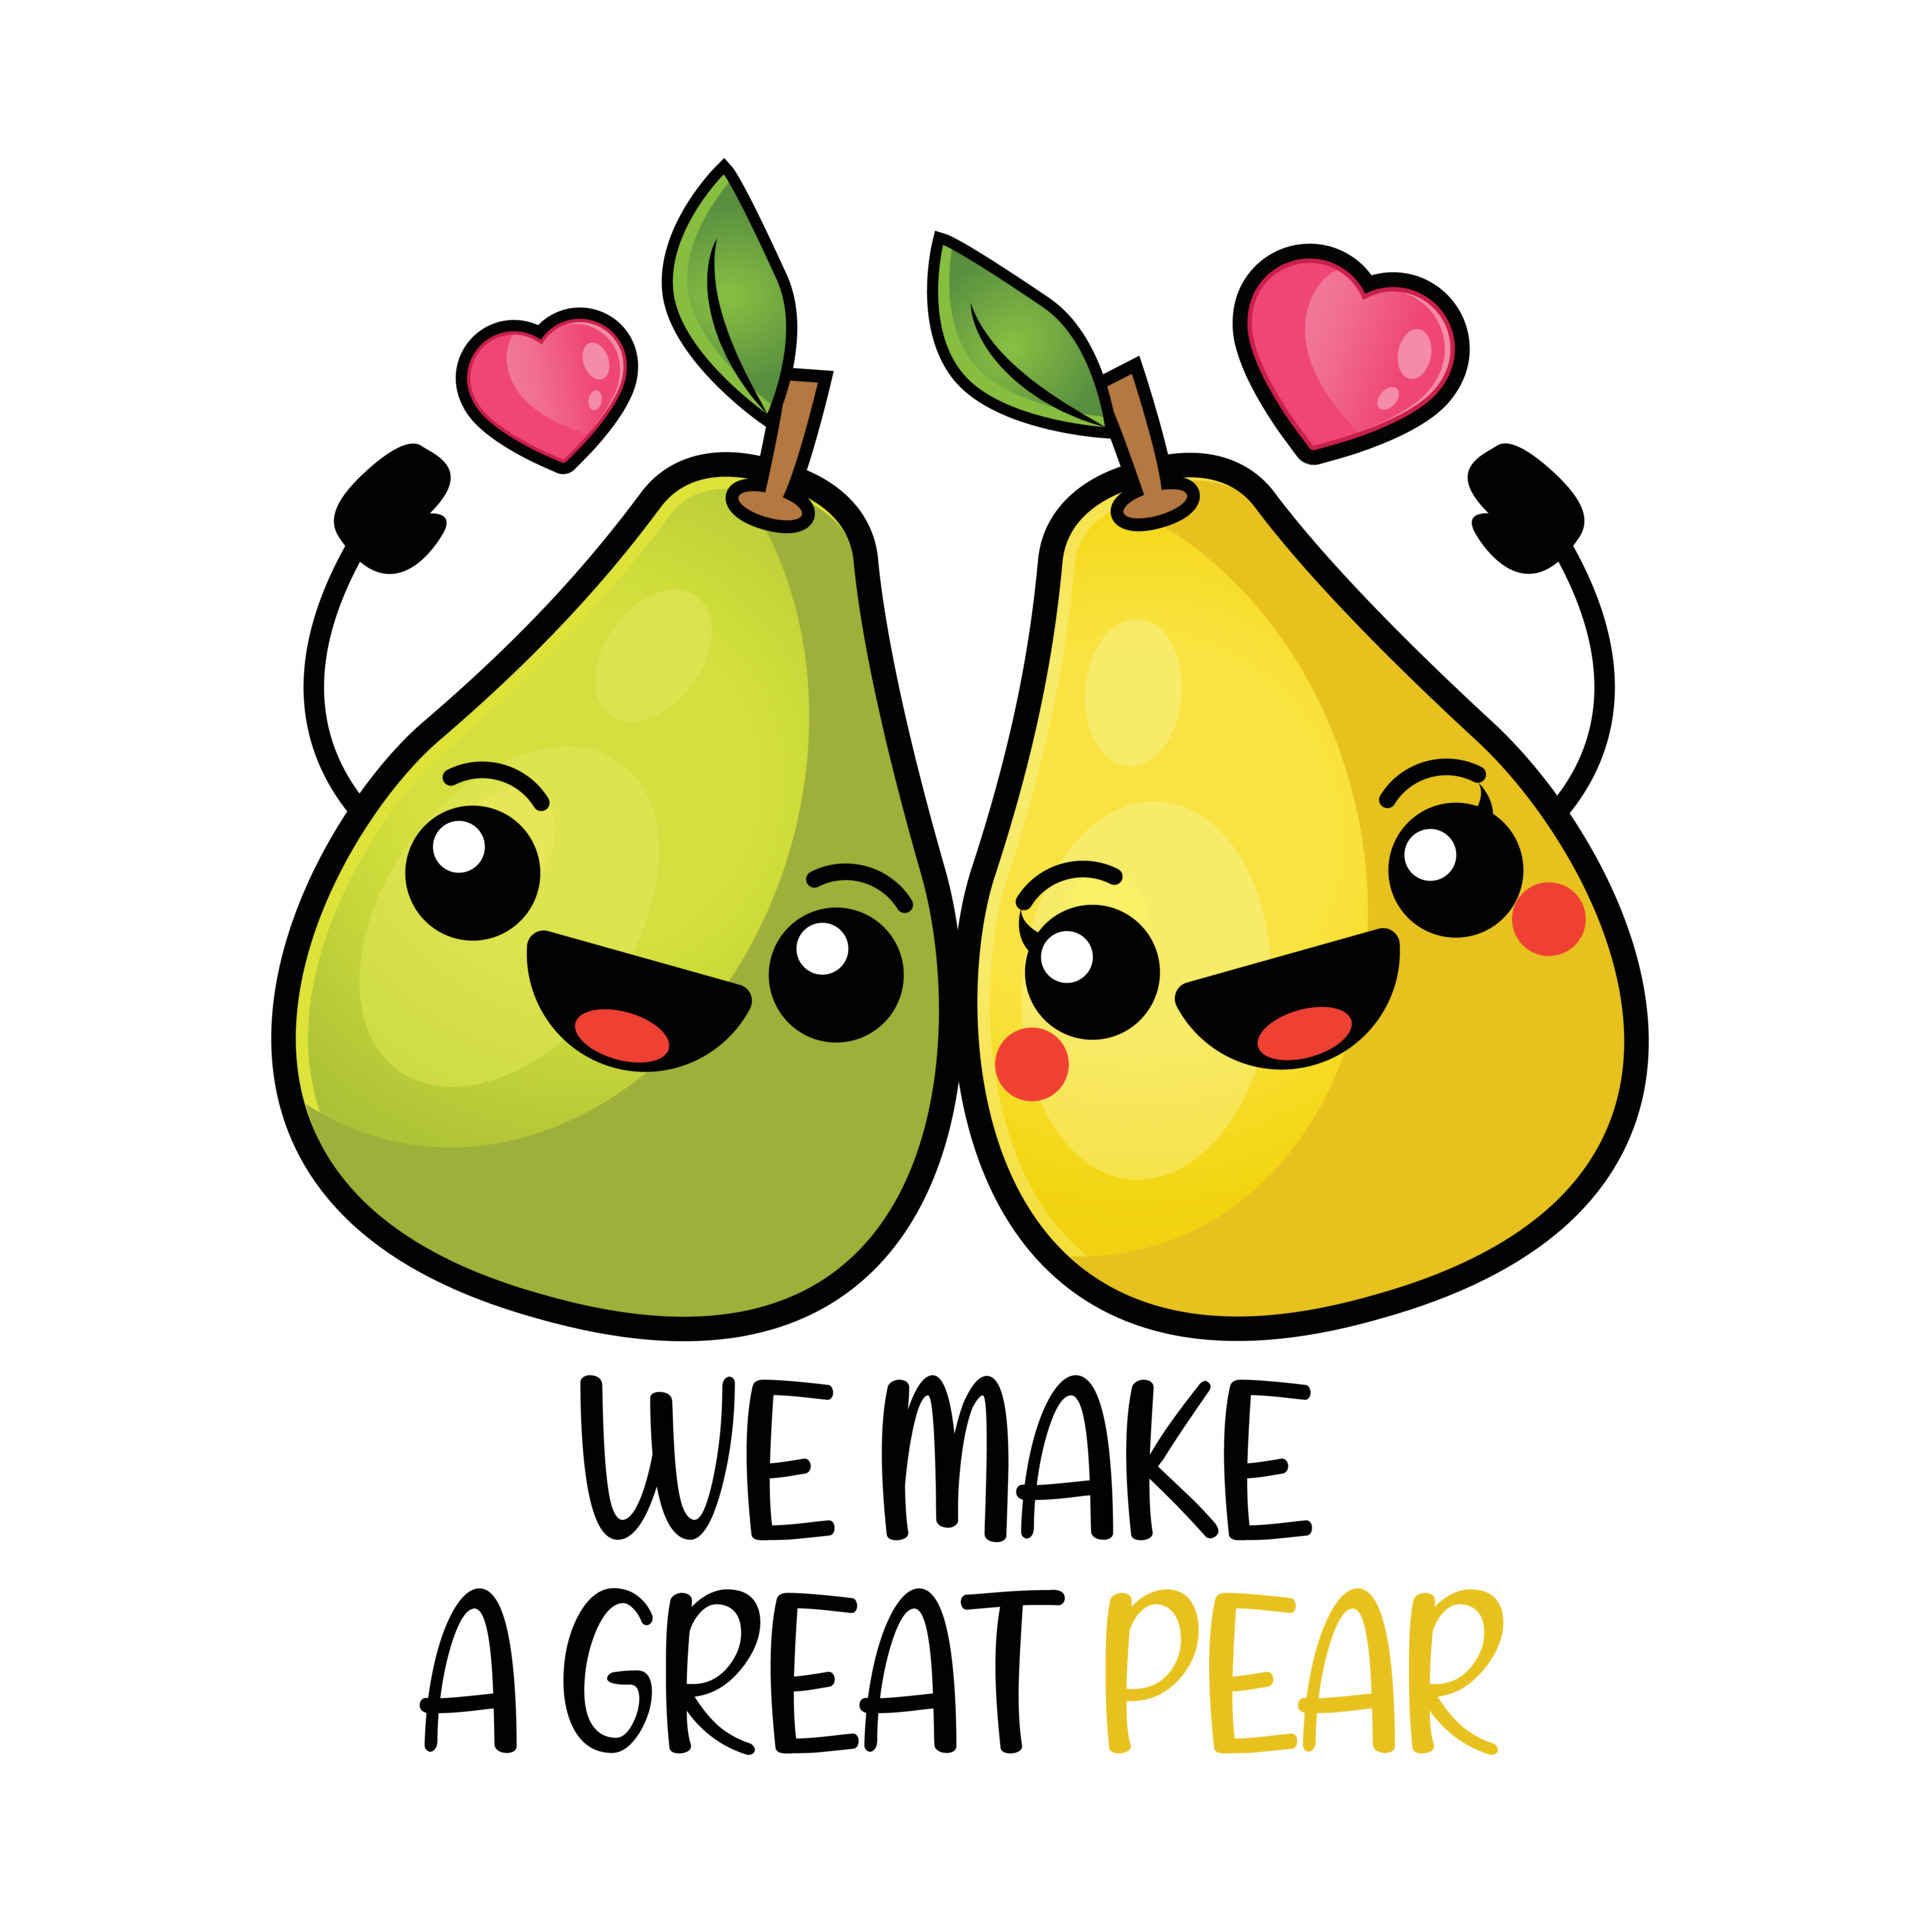 https://static.vecteezy.com/system/resources/previews/006/431/766/original/the-perfect-pair-of-pear-valentine-s-day-card-free-vector.jpg